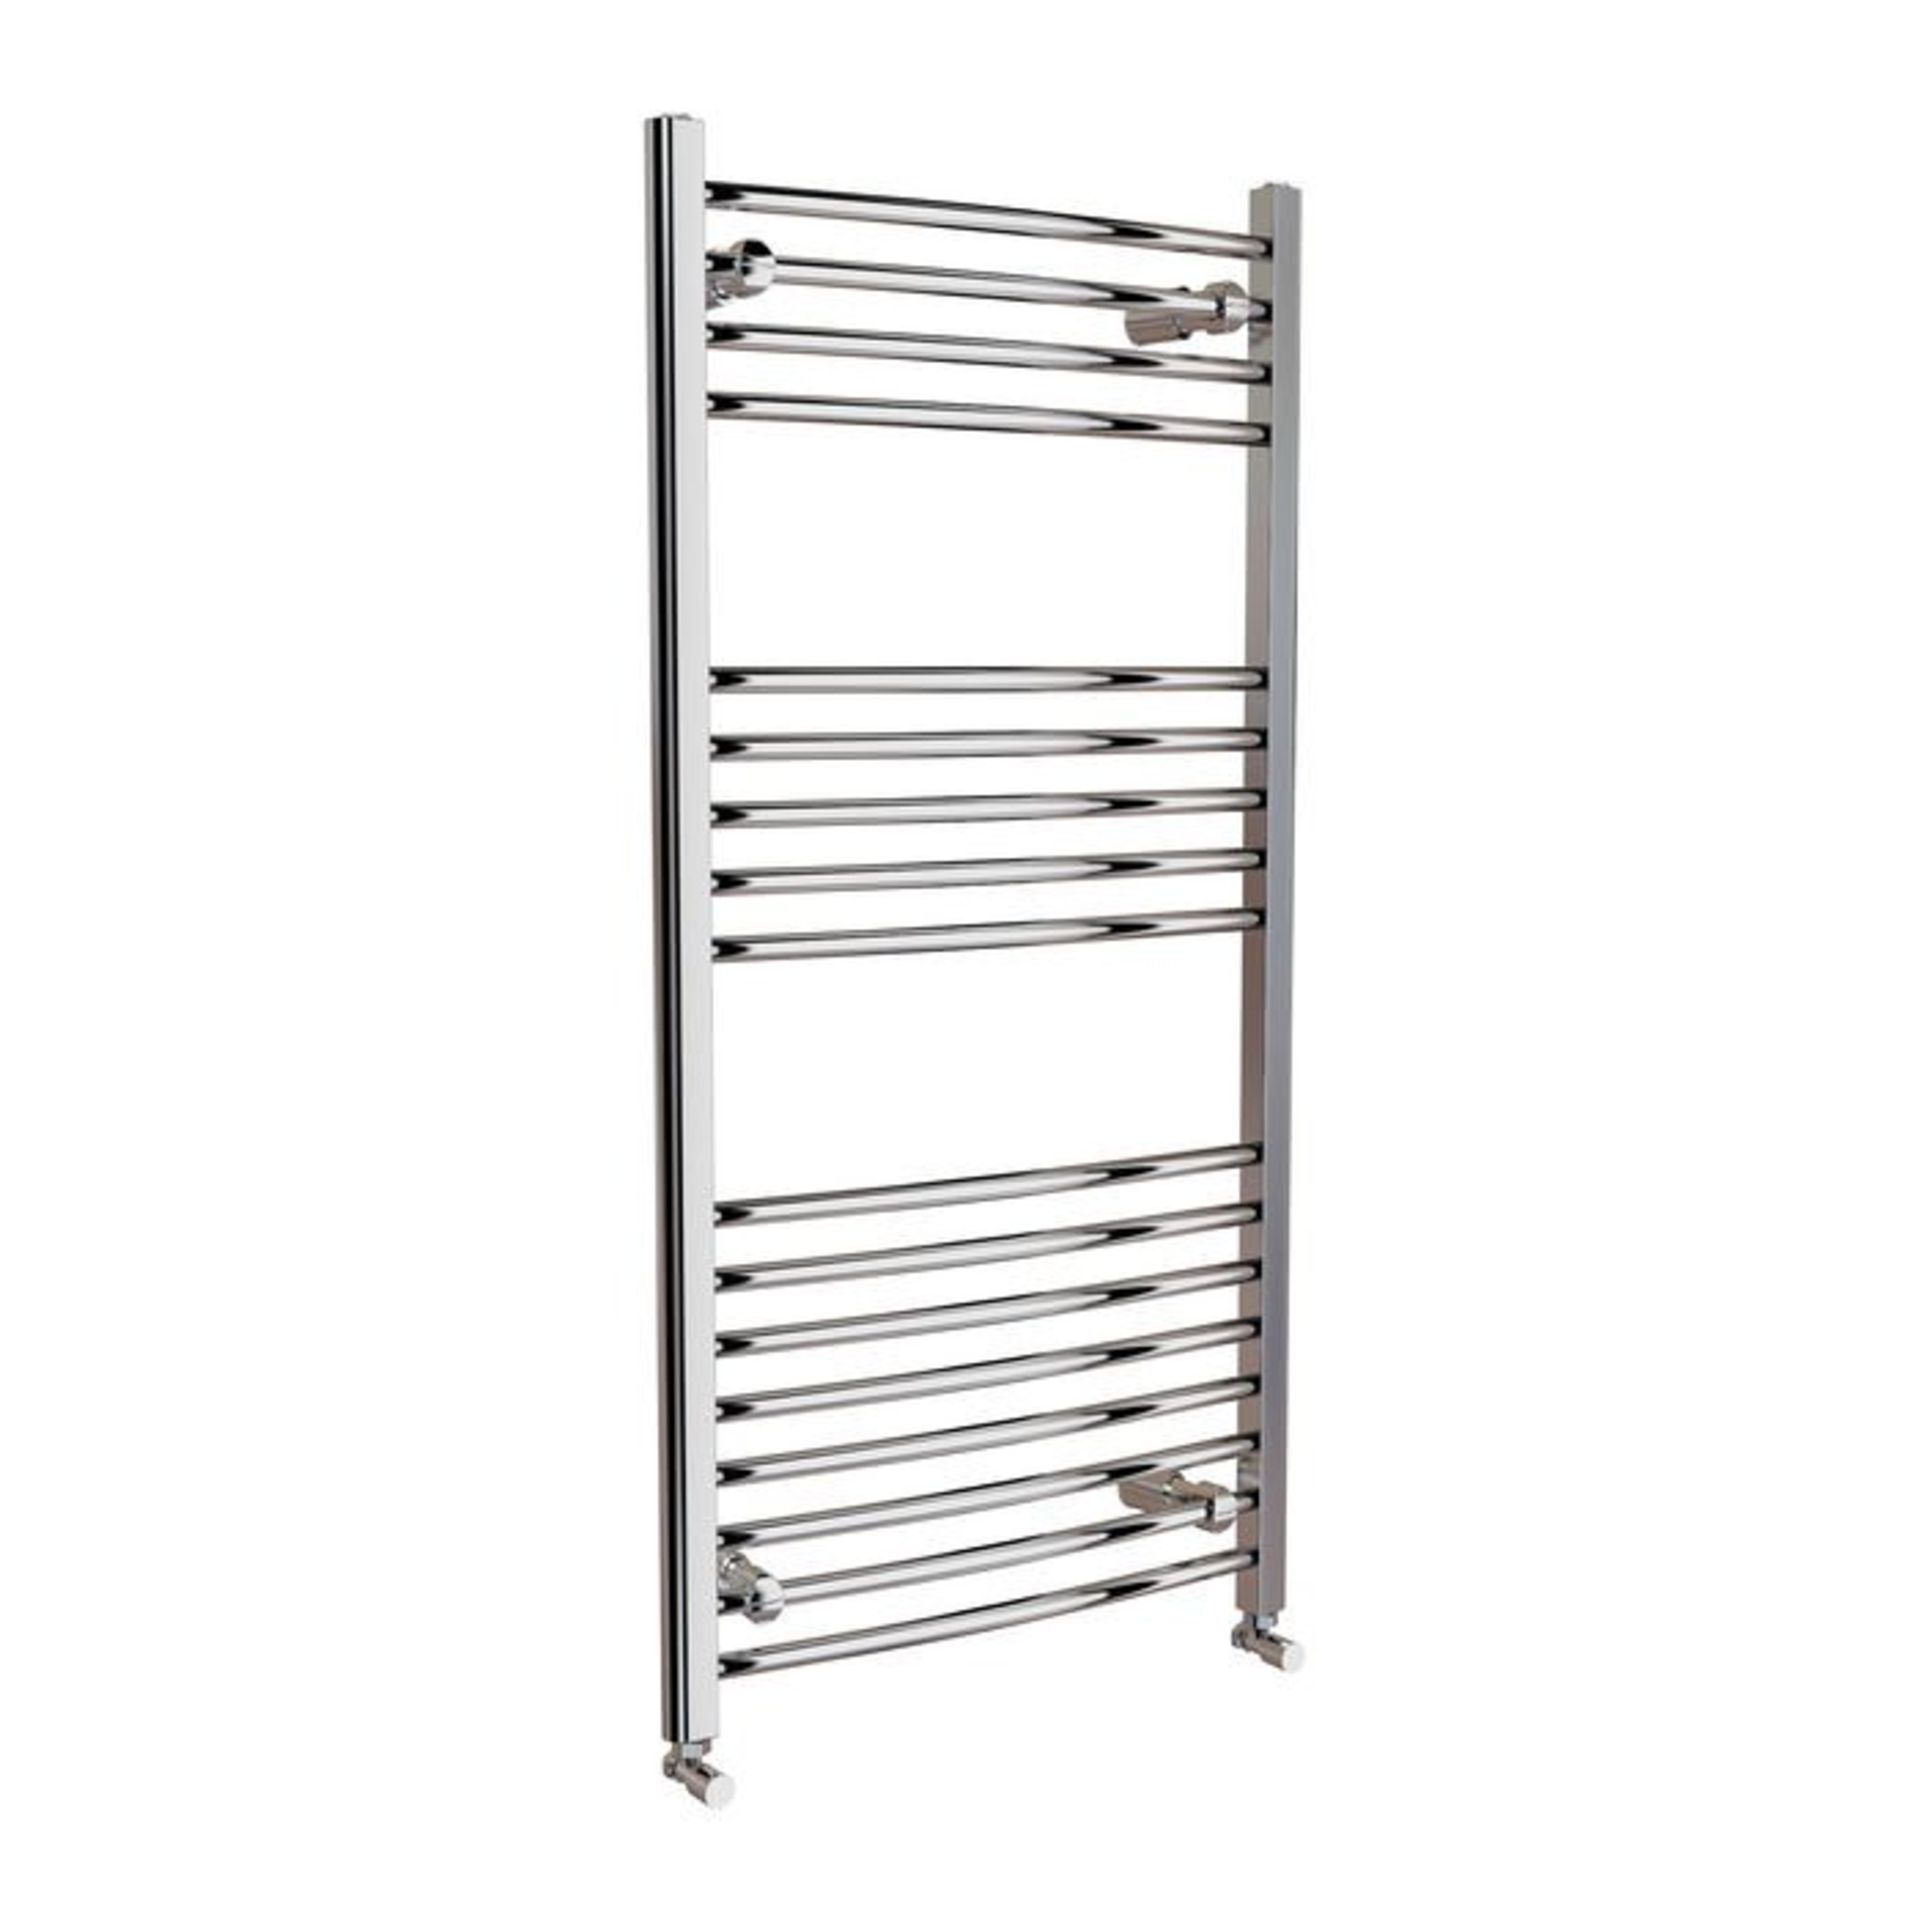 (H150) 1200x600mm - 20mm Tubes - Chrome Curved Rail Ladder Towel Radiator. RRP £137.59. Low carbon - Image 3 of 3